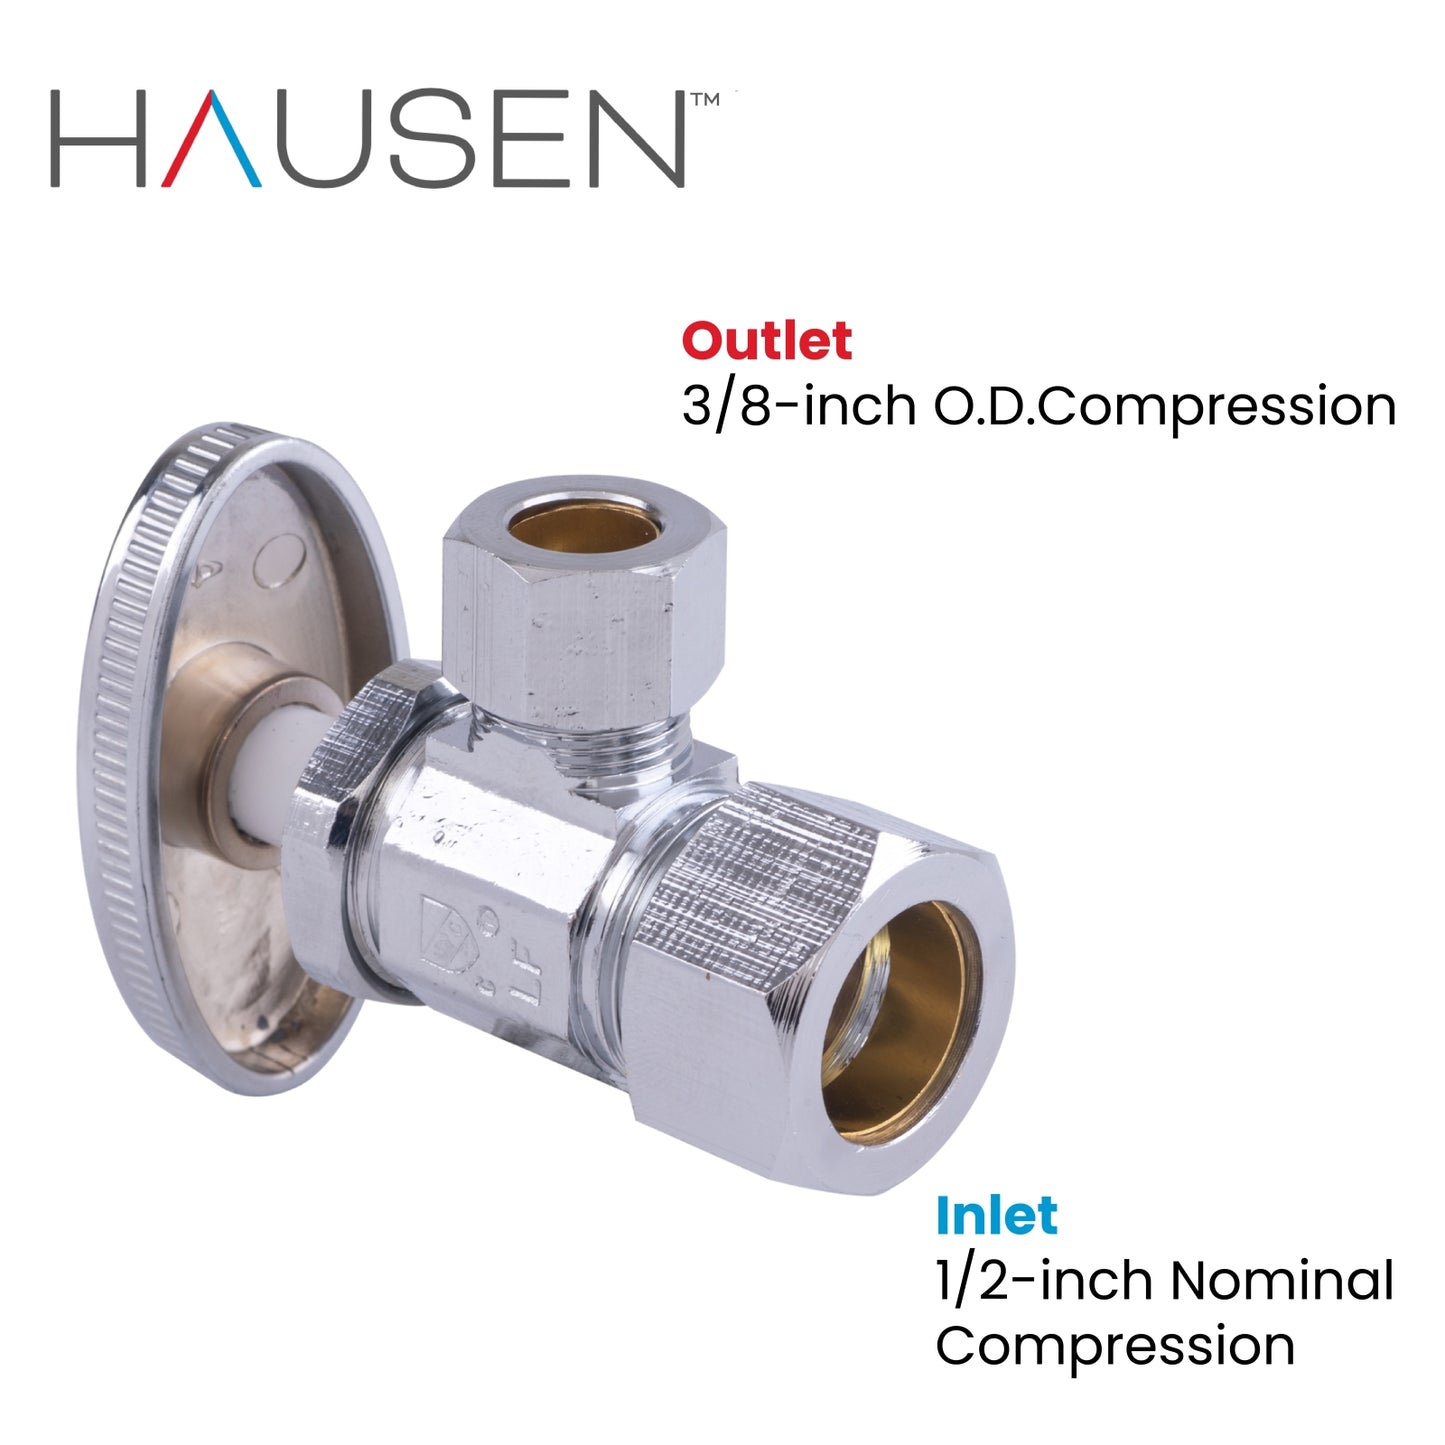 Hausen 1/2-inch Nominal Compression Inlet x 3/8-inch O.D. Compression Outlet Multi-Turn Angle Water Stop, 1-Pack